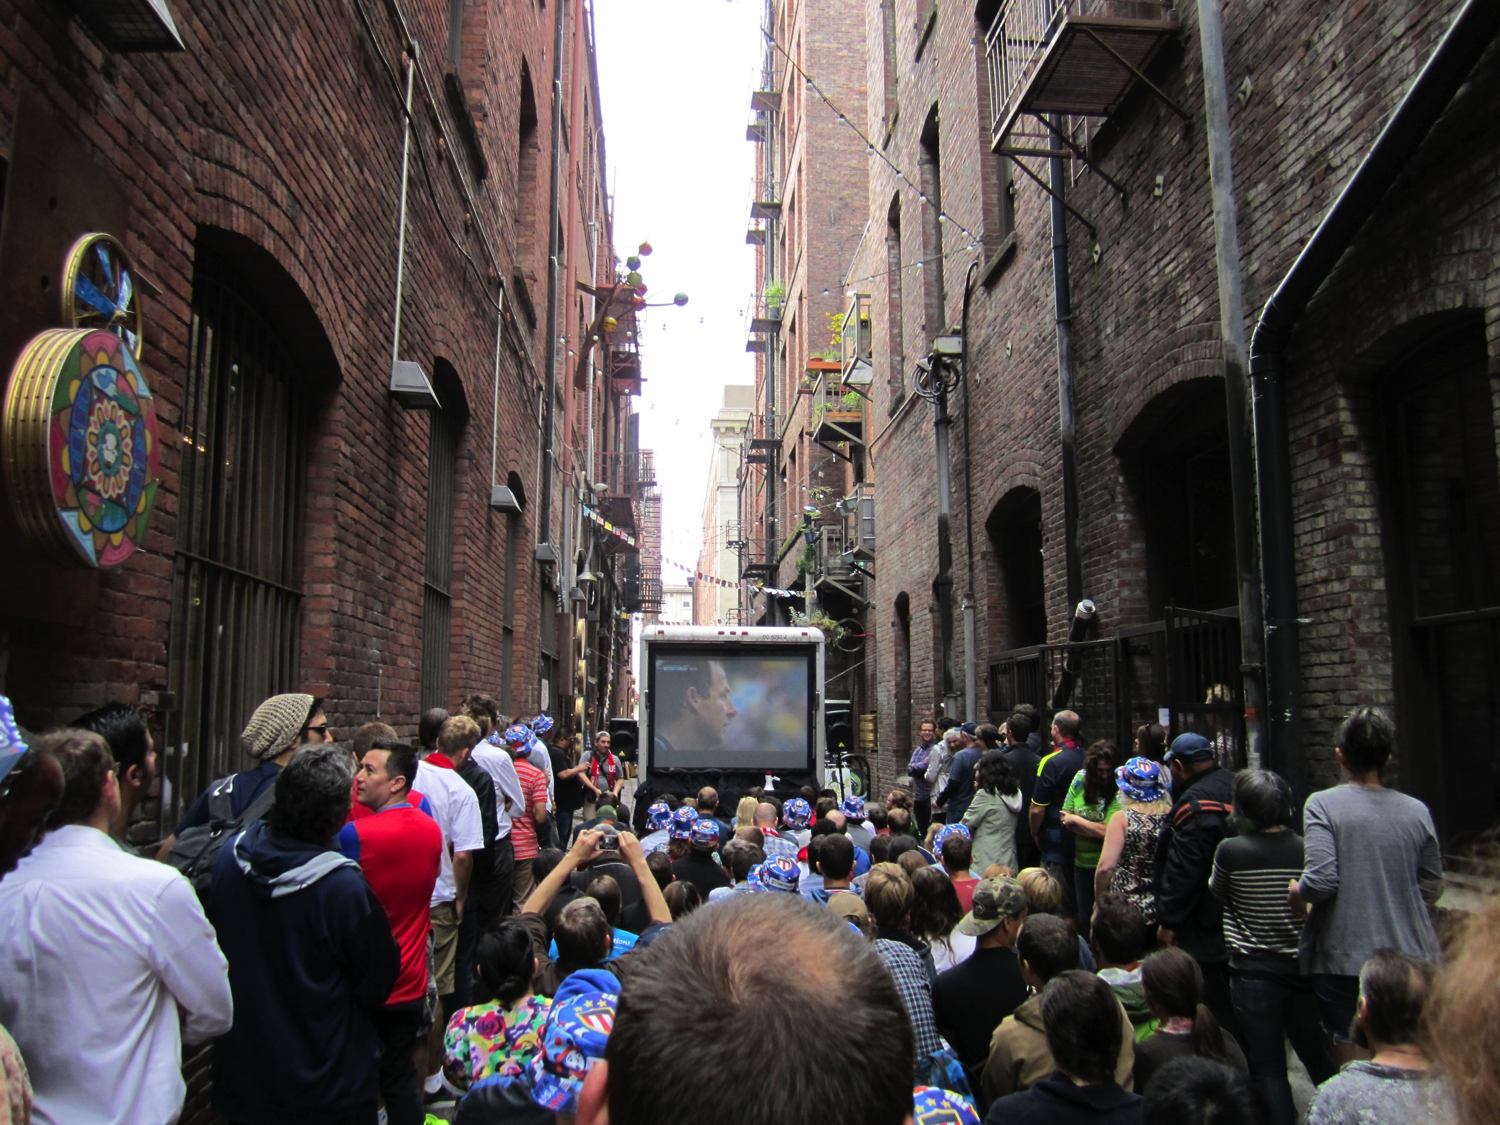 USA-GER at Nord Alley by SounderBruce via Flickr (CC BY-SA 2.0)